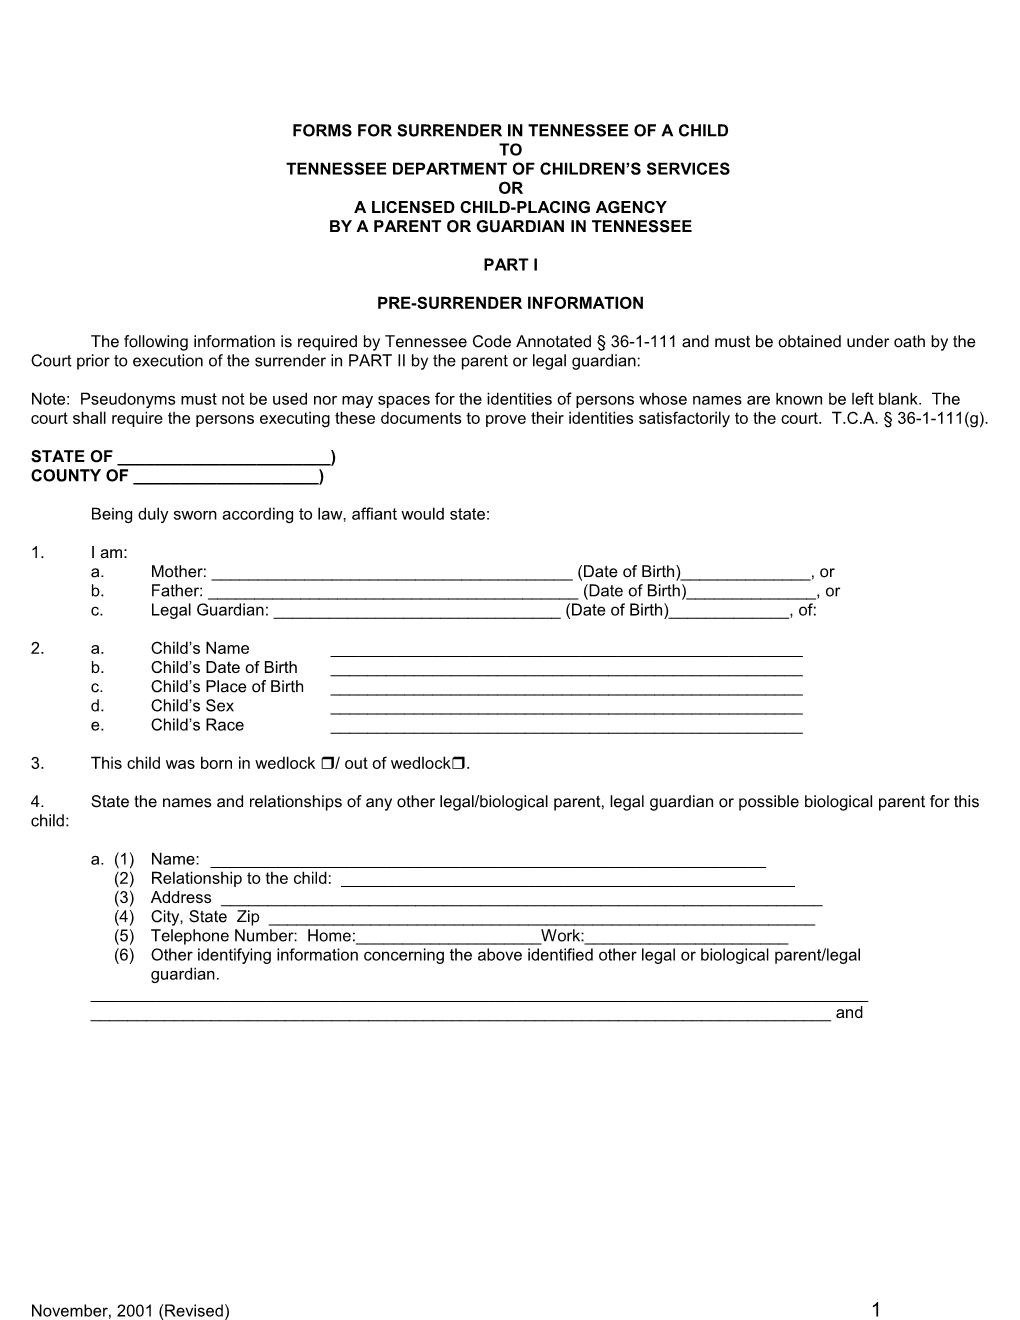 Forms for Surrender in Tennessee of a Child